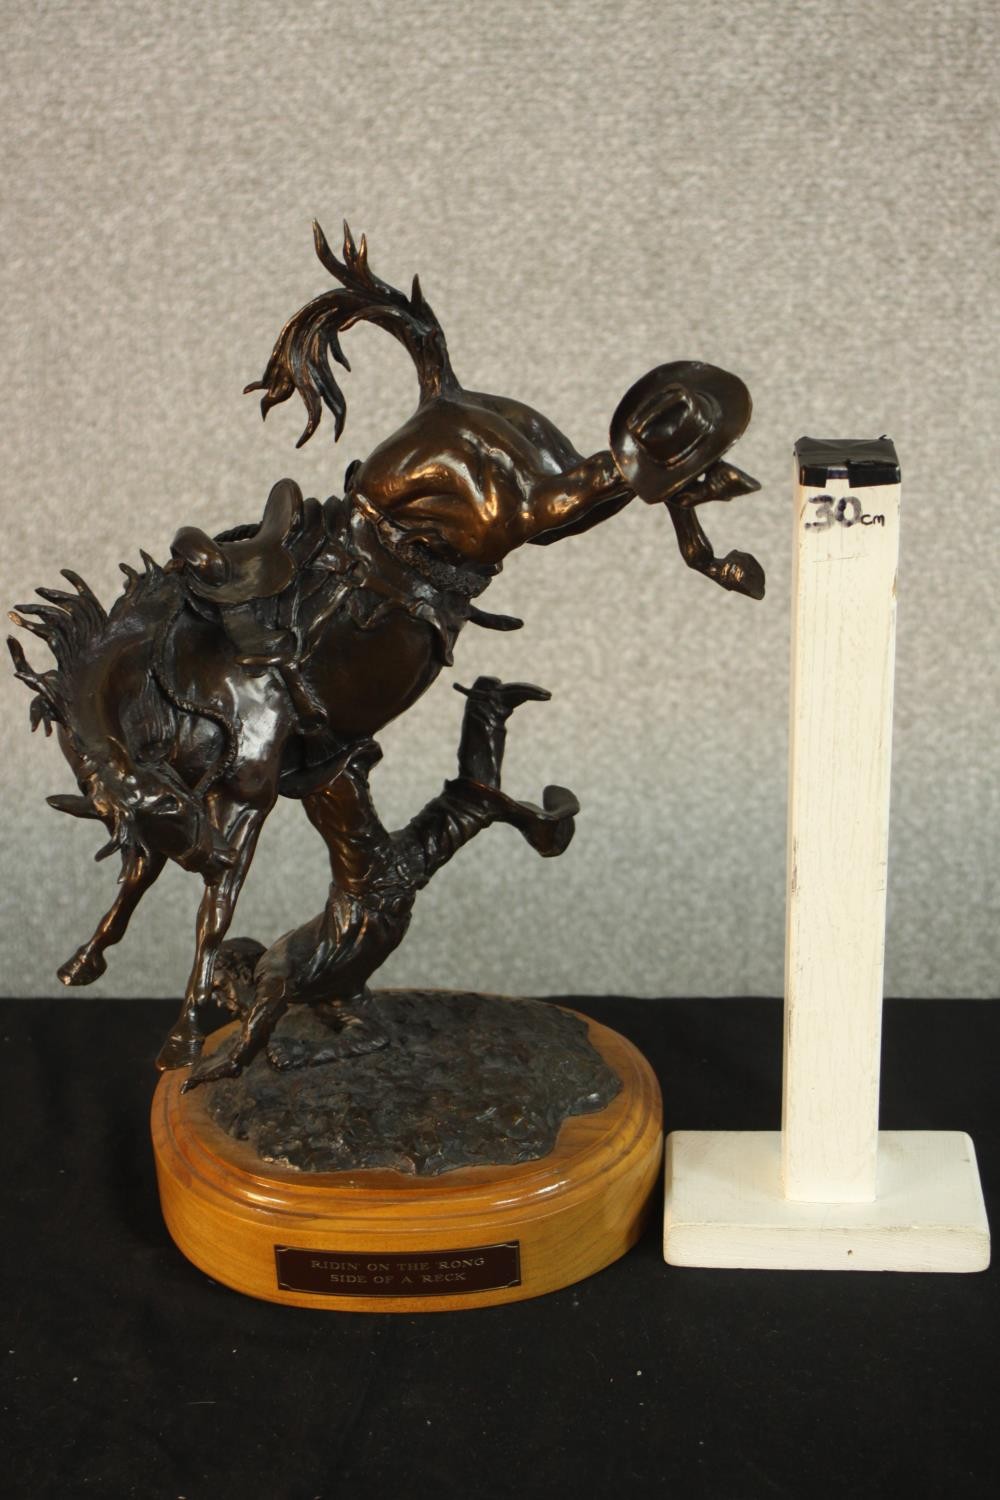 Don Toney, 1954, bronze, 'Riding on the Wrong Side of a Wreck', bucking horse with falling cowboy, - Image 2 of 10